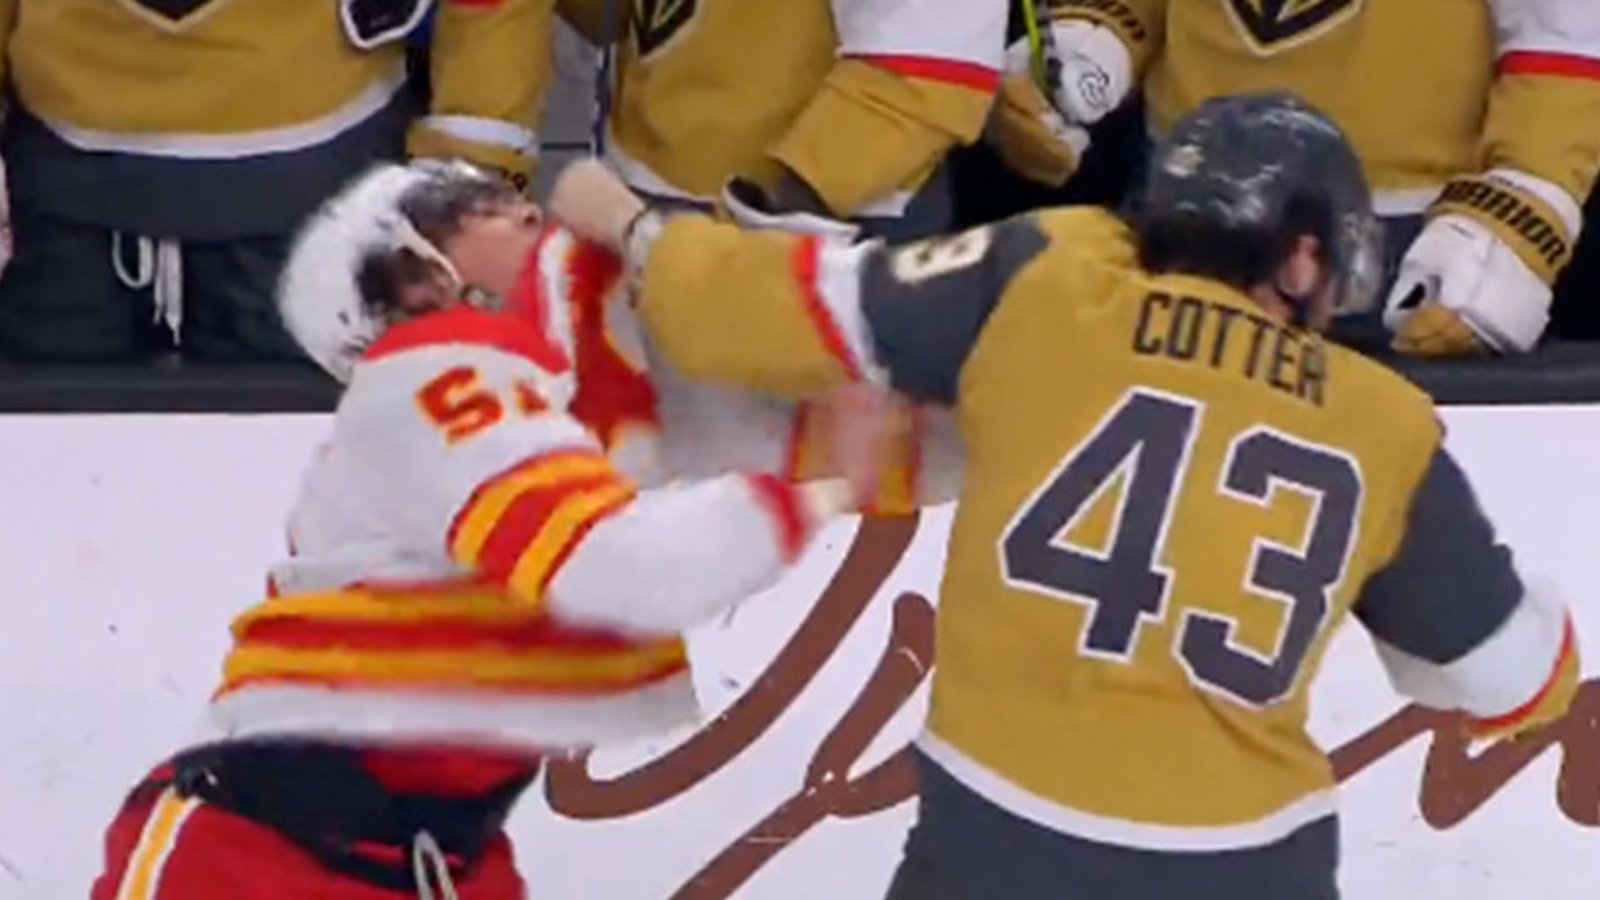 Stecher and Cotter beat the wheels off each other in the scrap of the season!